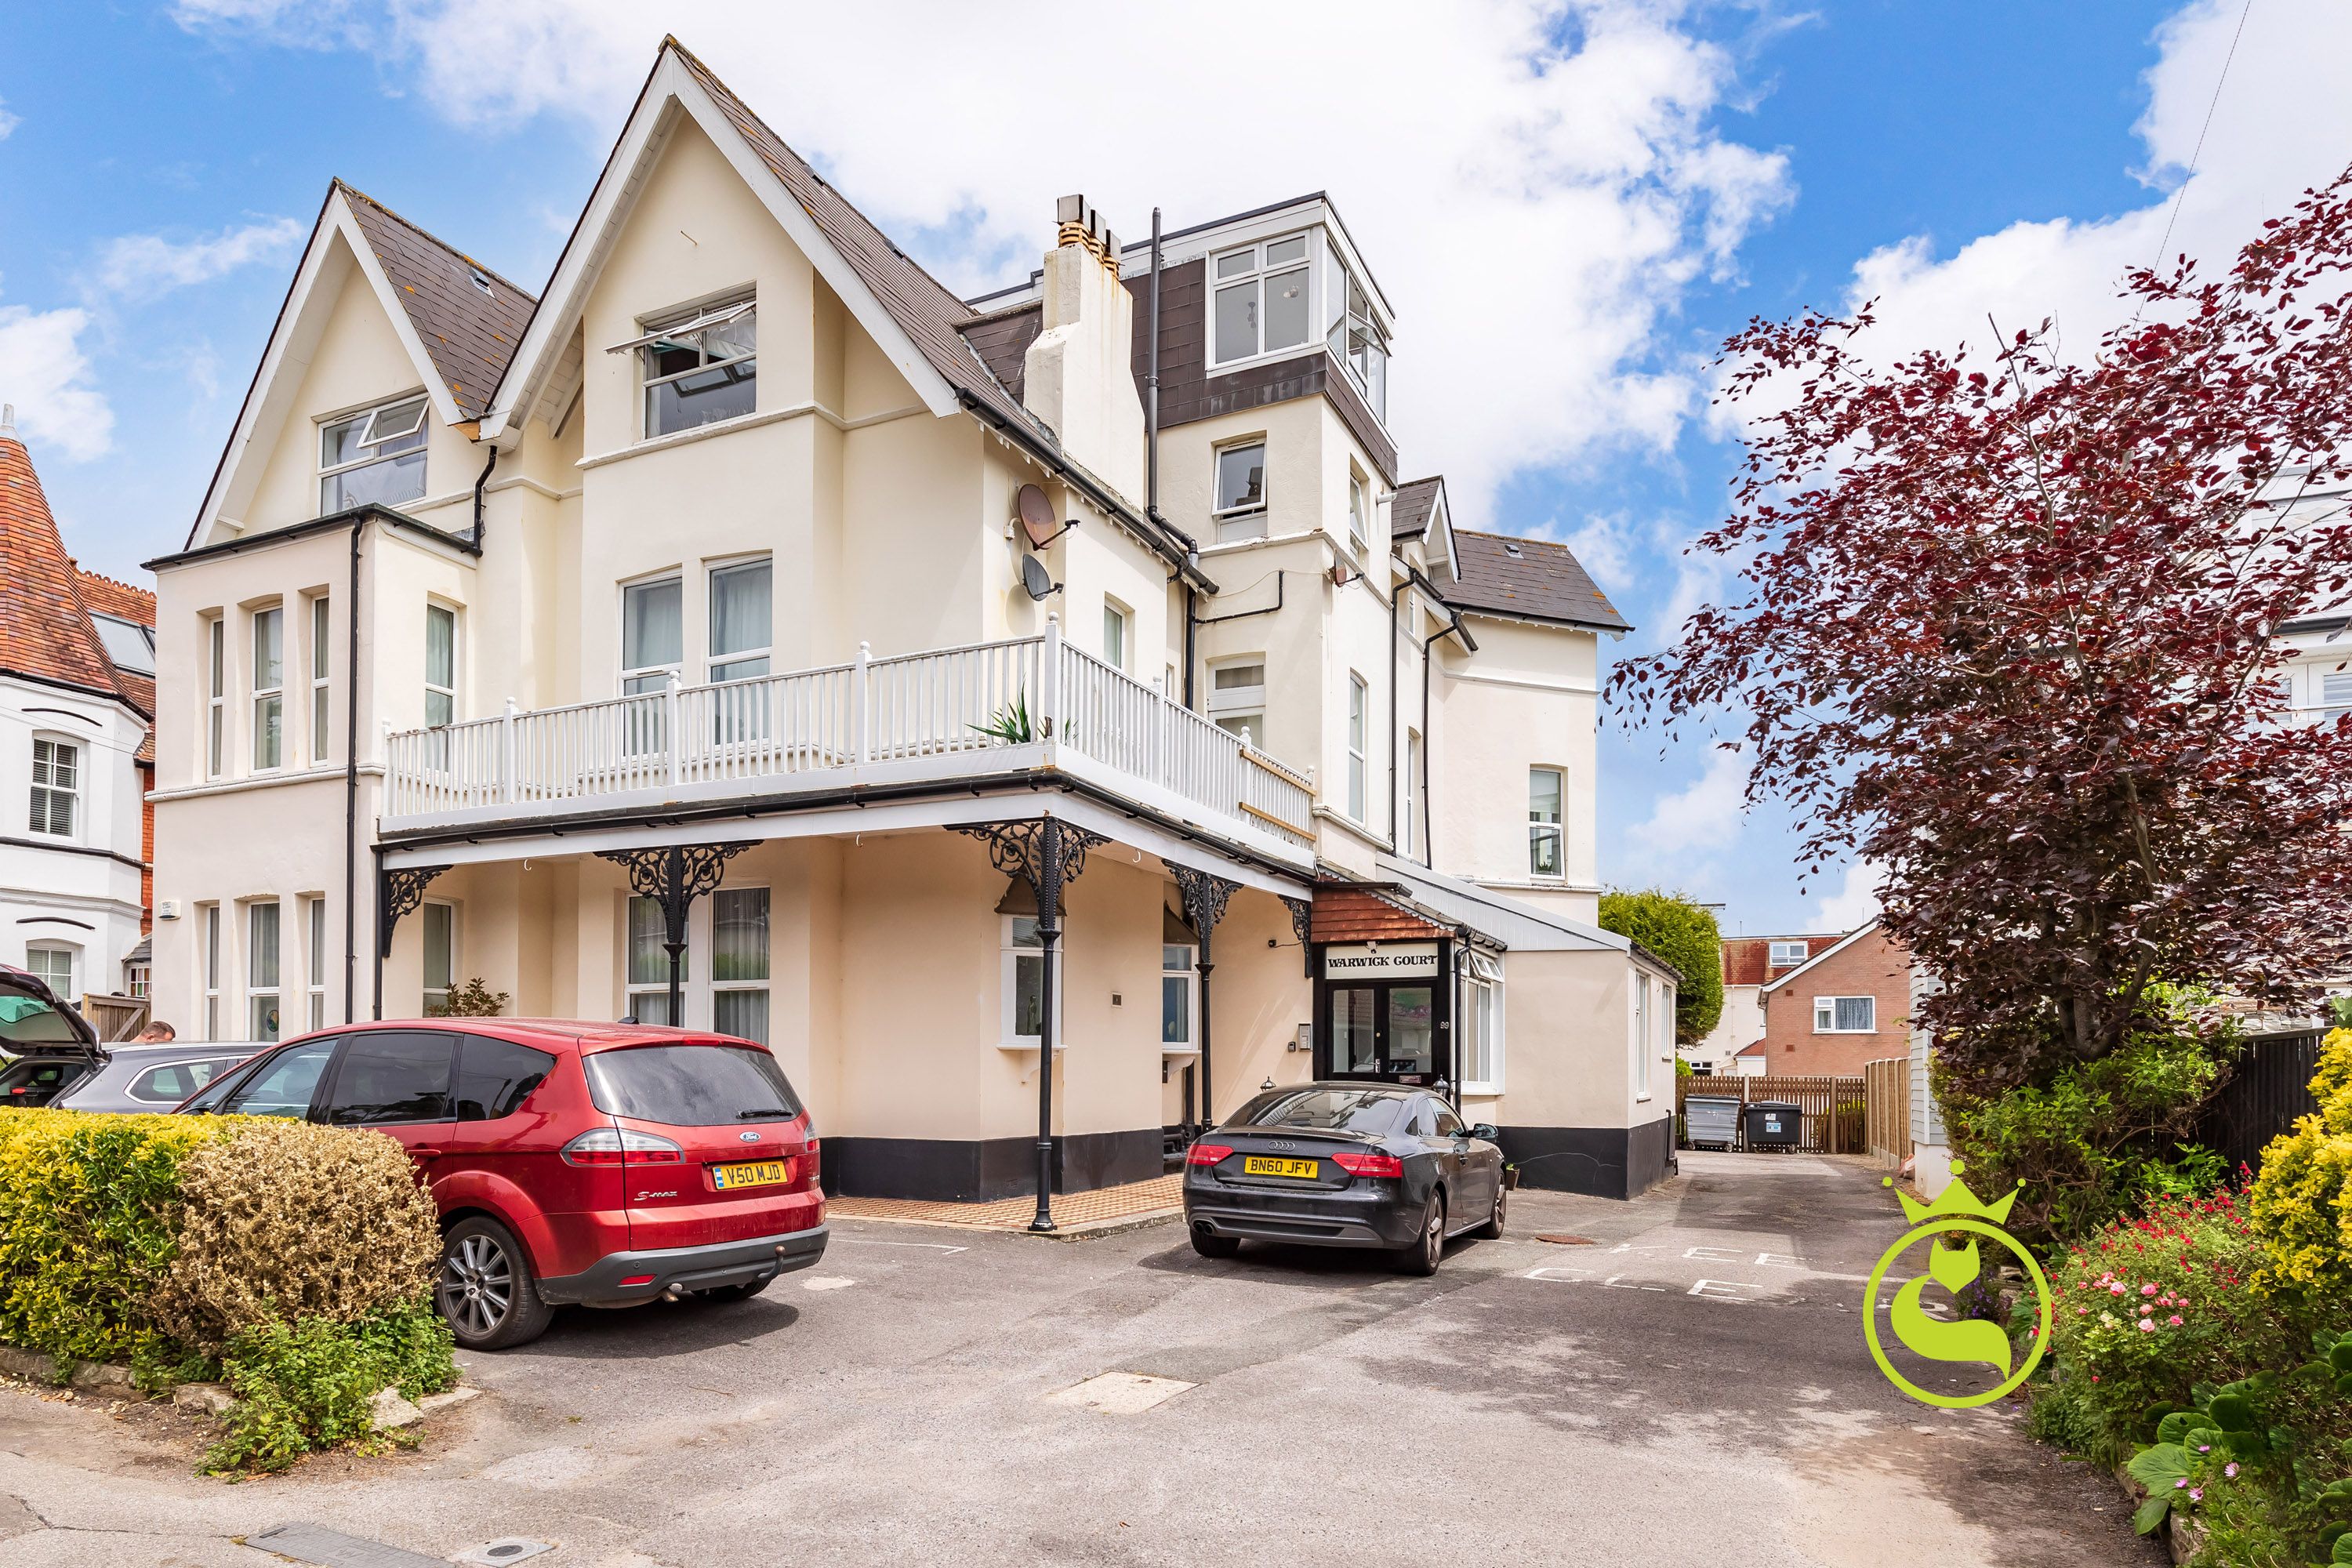 2 bed for sale in Alumhurst Road, Warwick Court, BH4, Bournemouth - Property Image 1